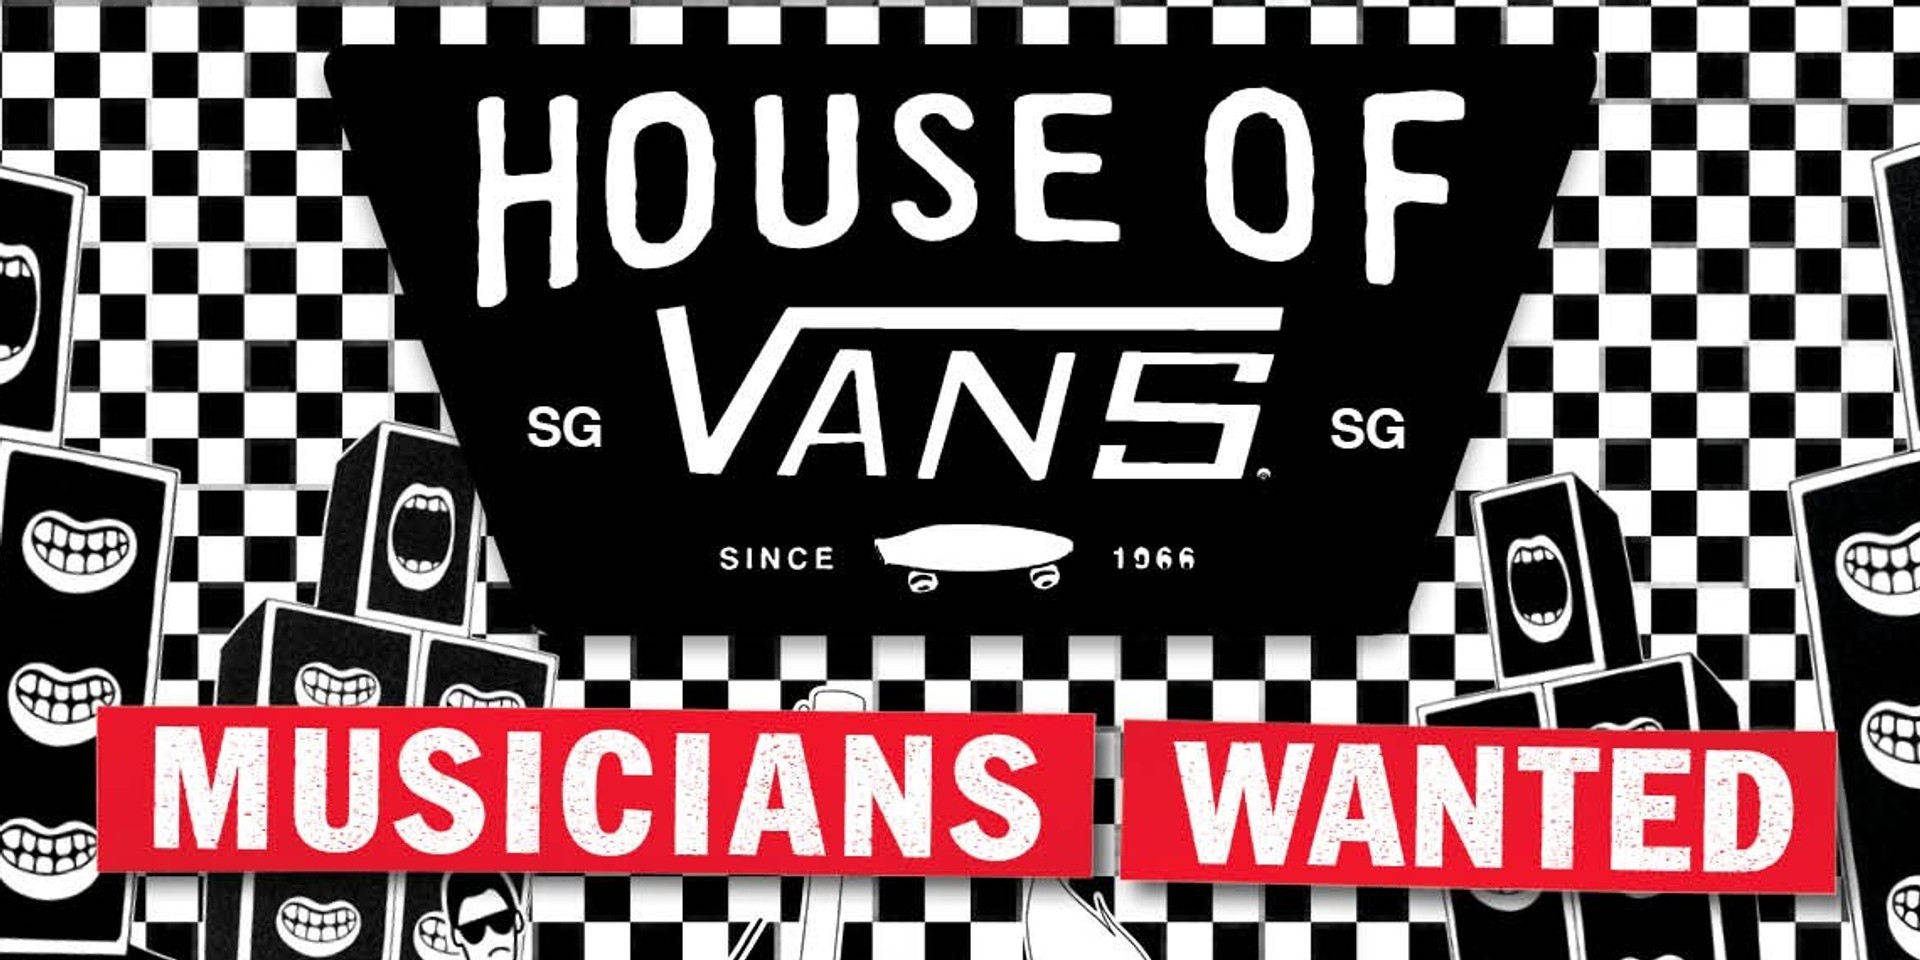 Vans unveils new competition, chance to perform at House of Vans in Singapore